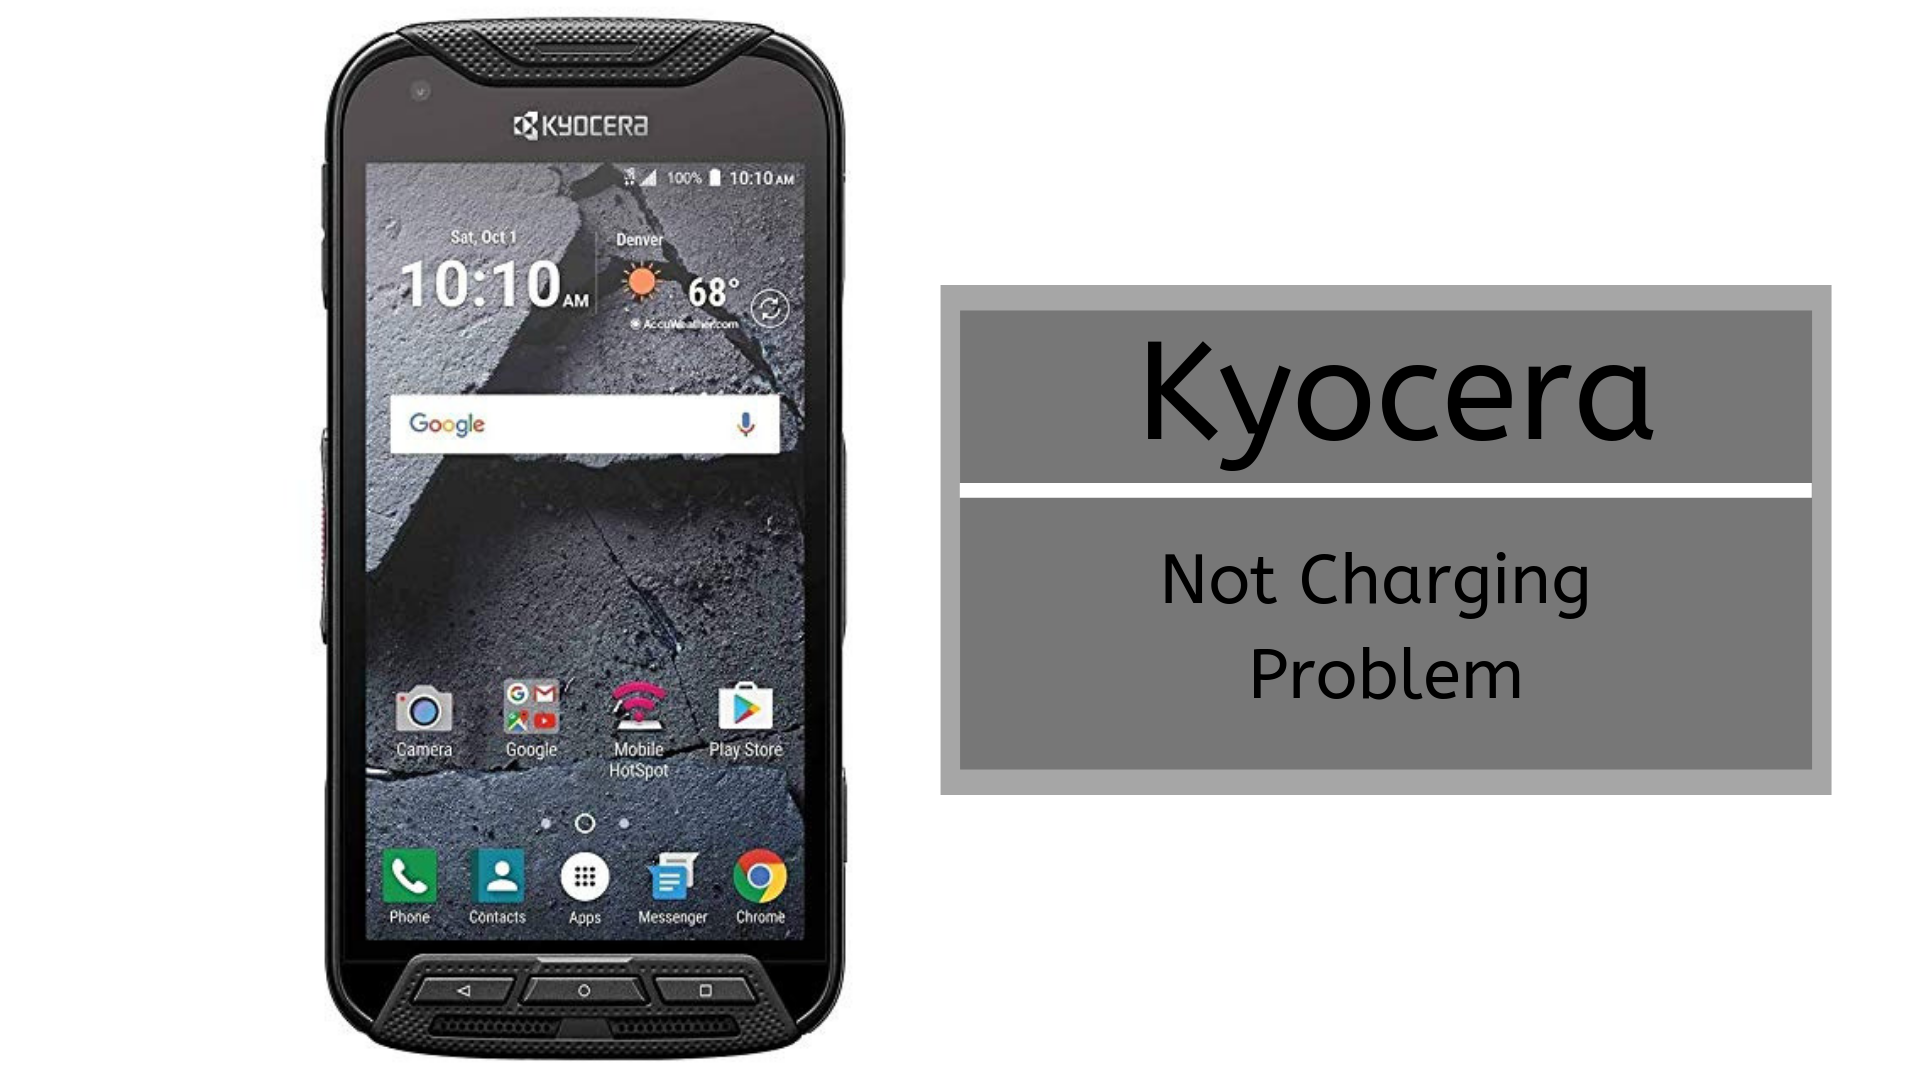 How To Fix Kyocera Not Charging Problem [Troubleshoot]